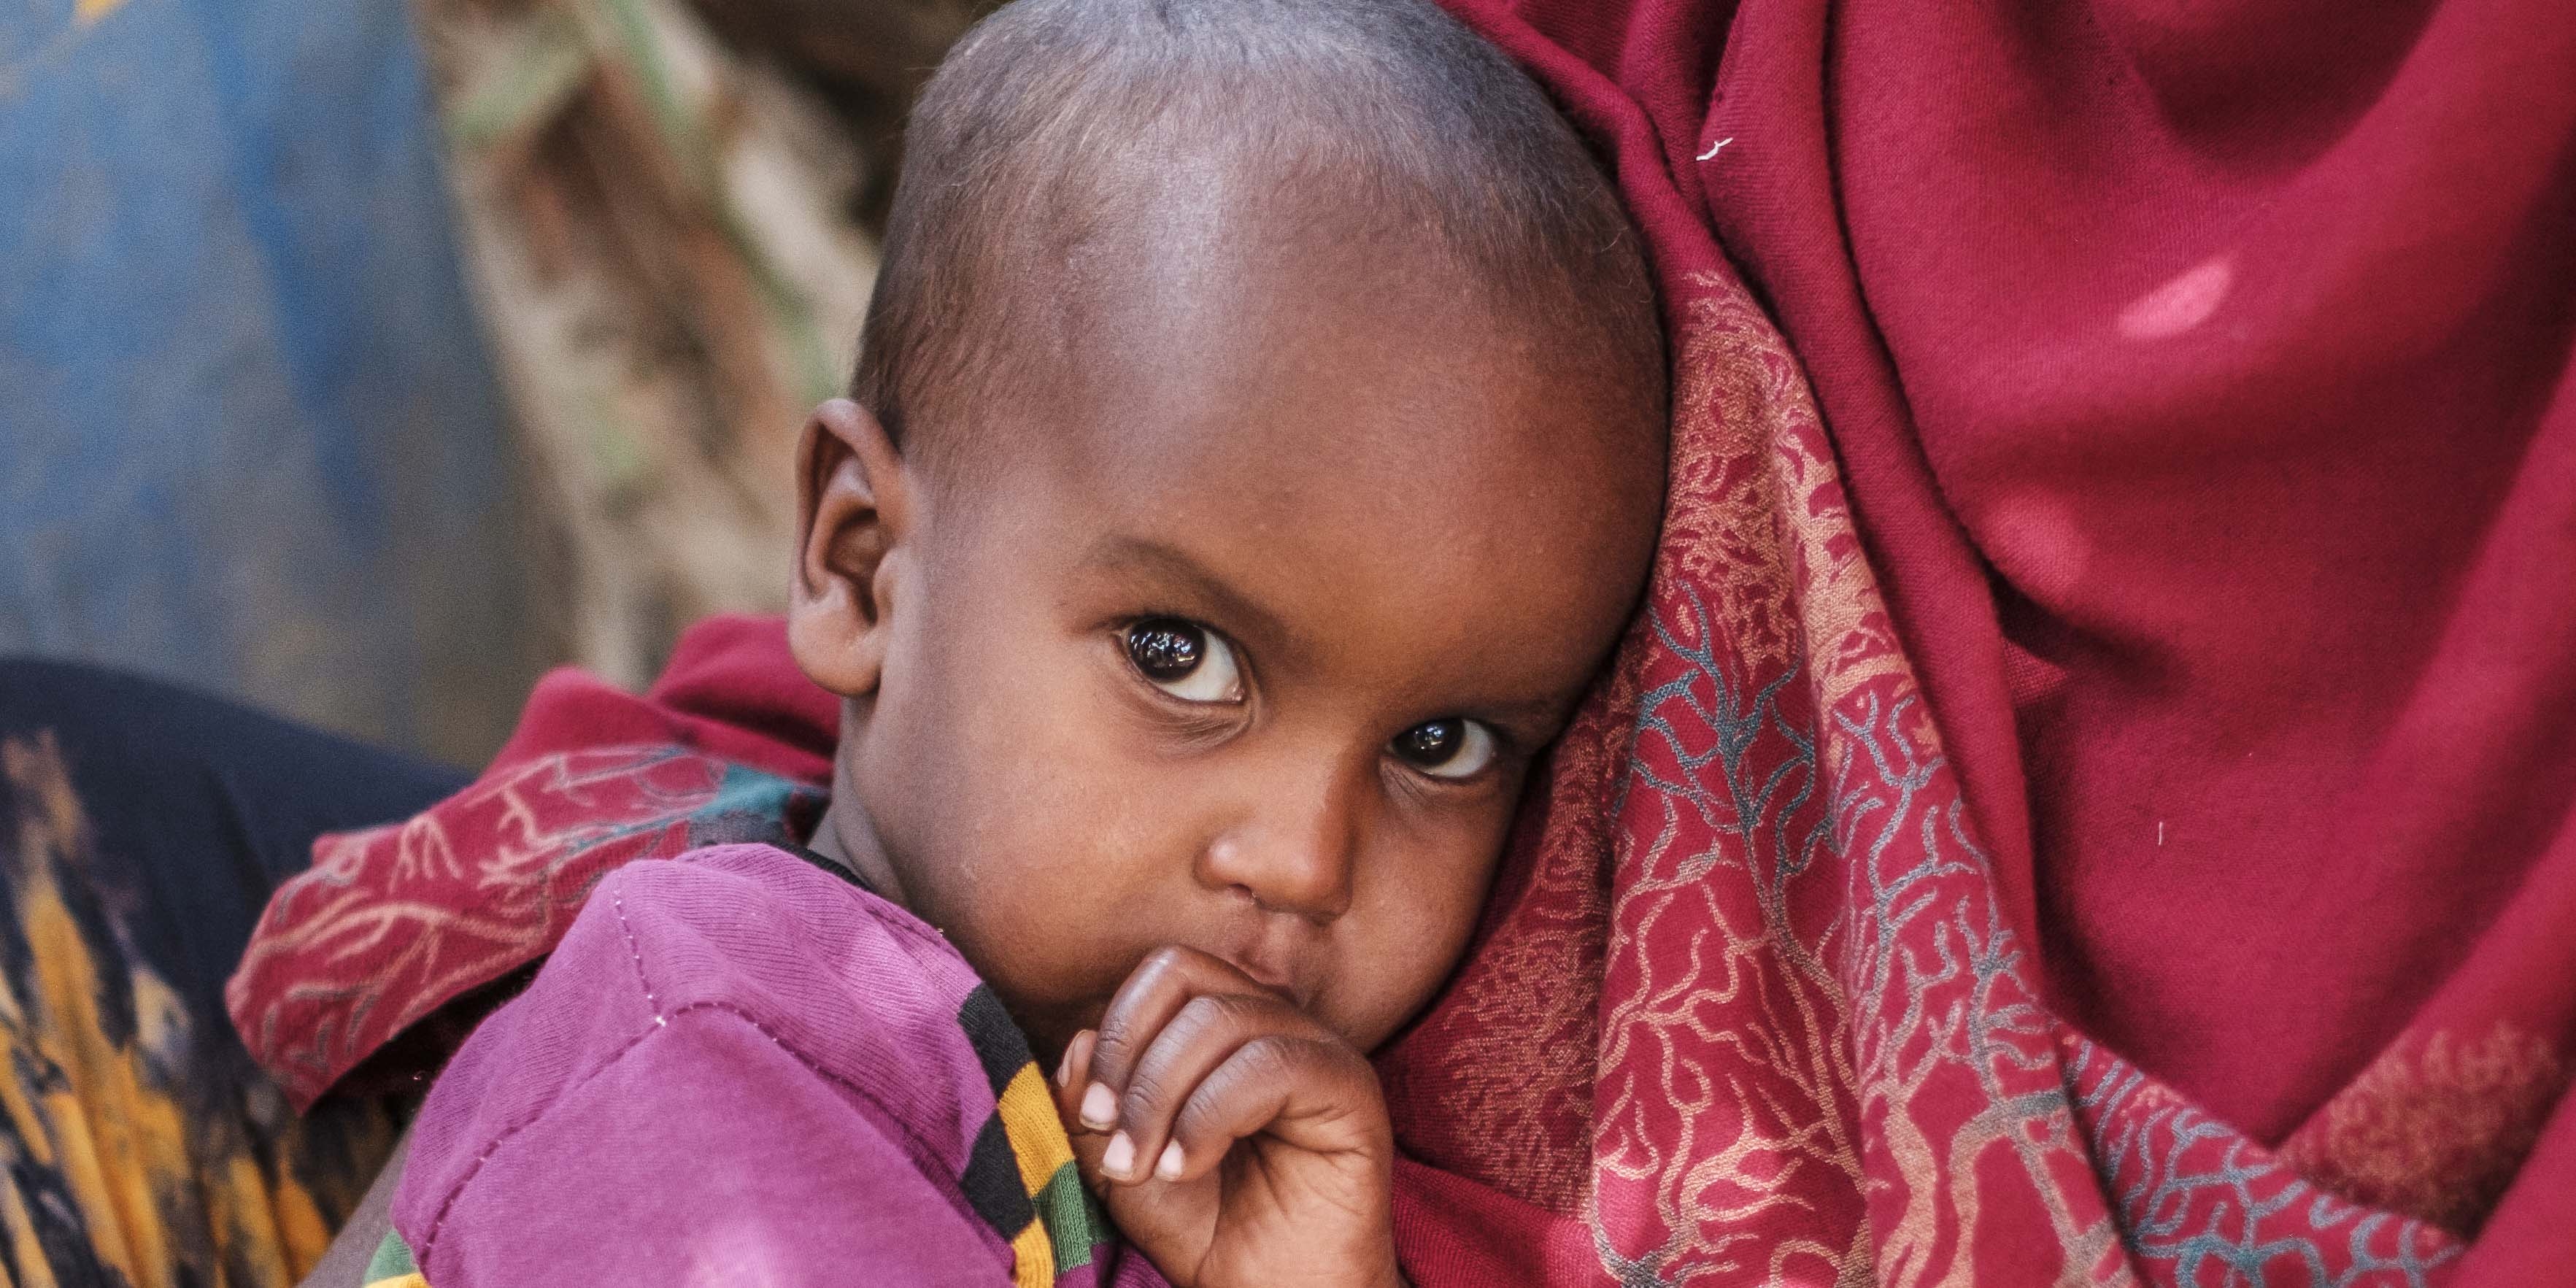 A small child who had been diagnosed with Severe Acute Malnutrition sits on his mother's lap in Ethiopia after receiving treatment.